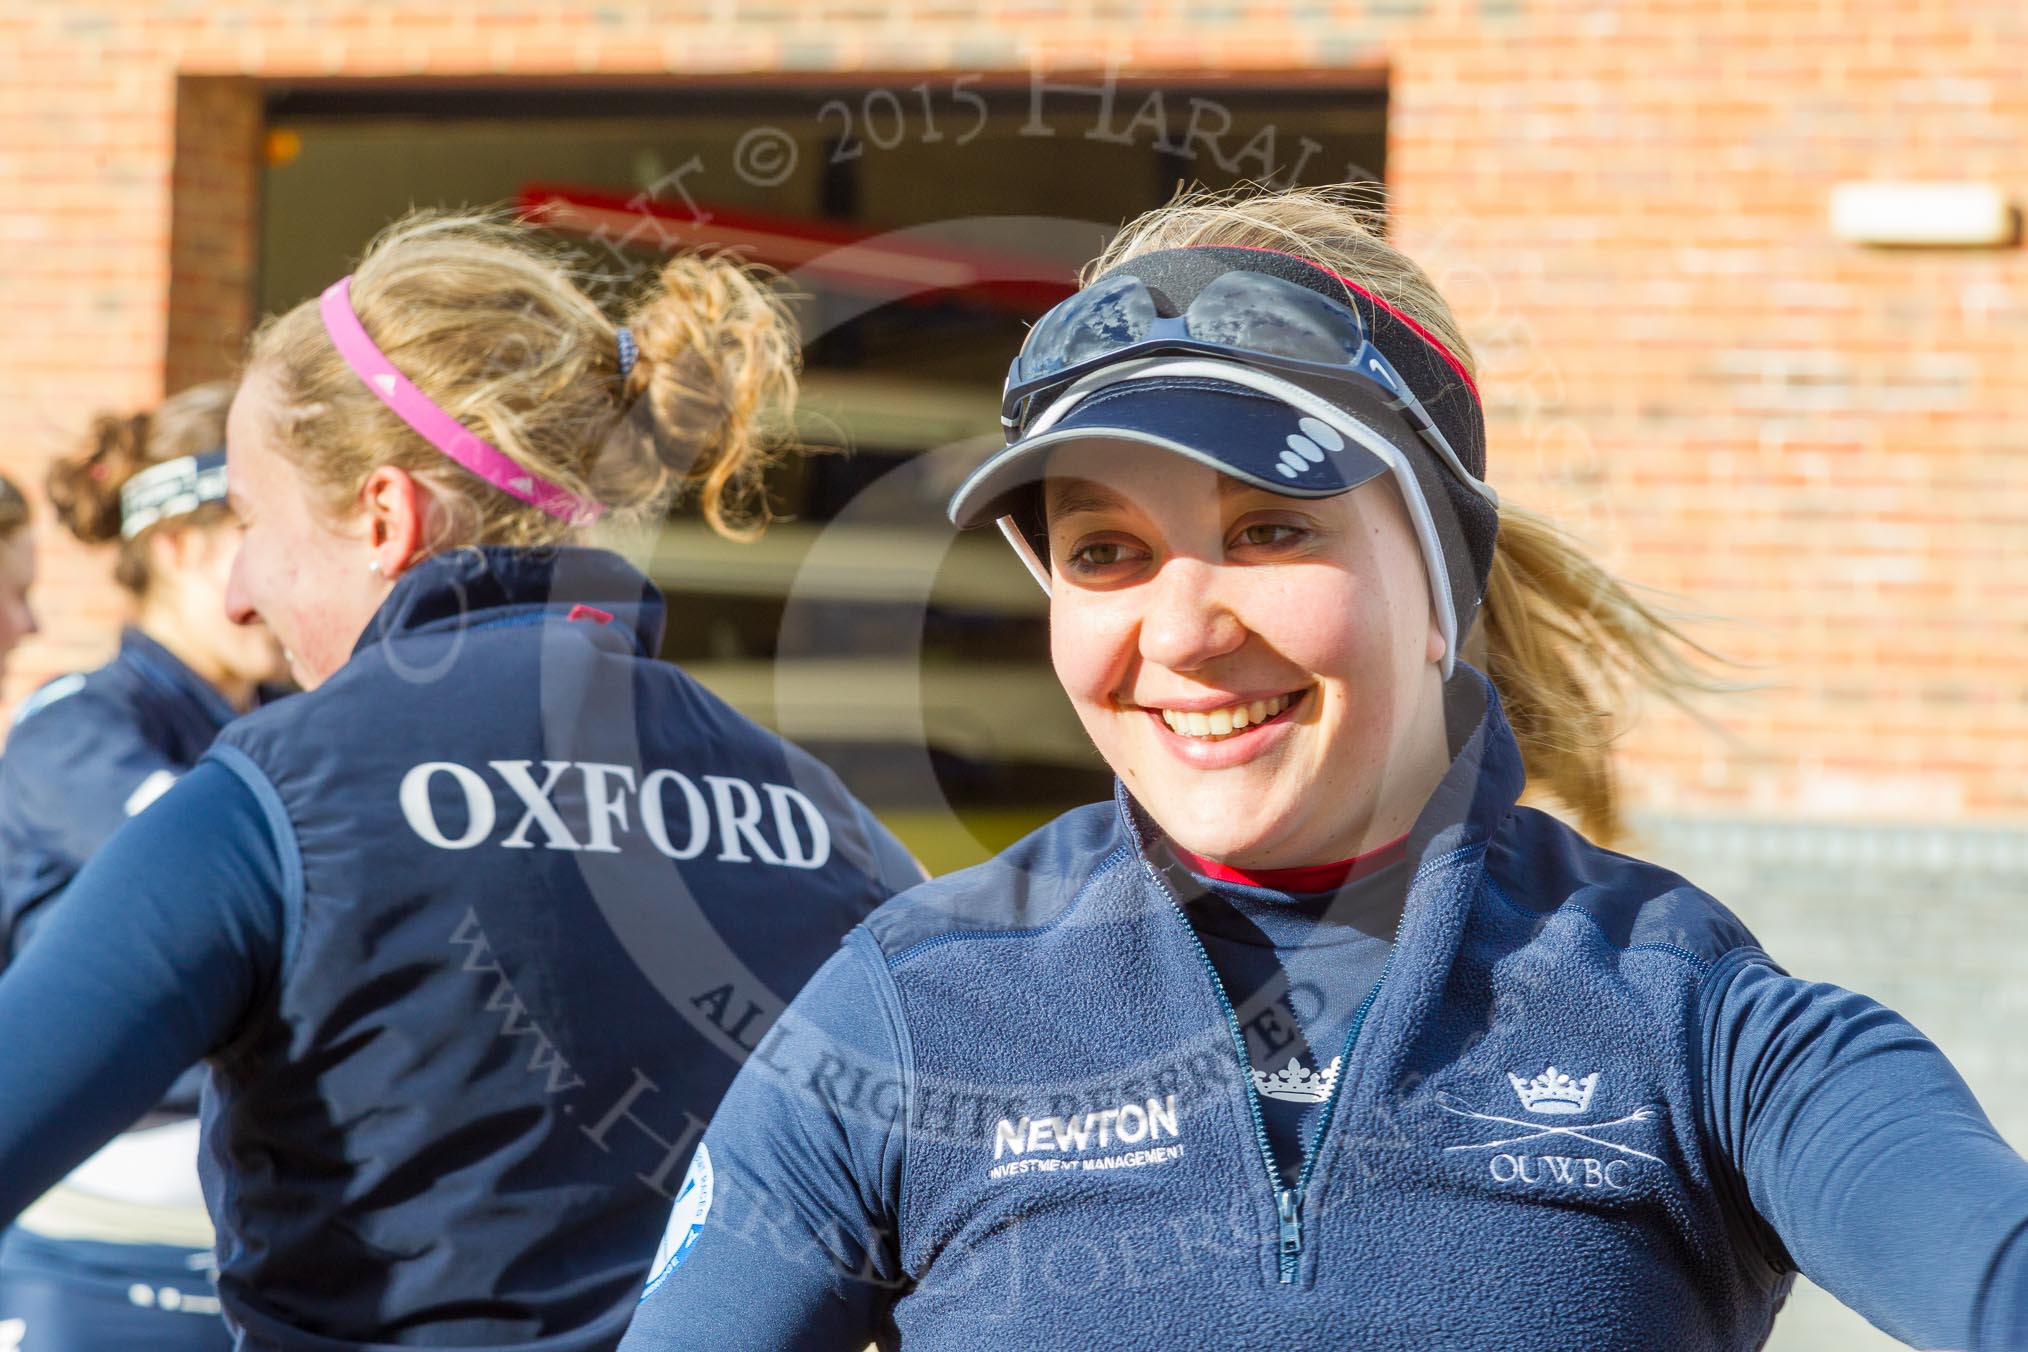 The Boat Race season 2015: OUWBC training Wallingford.

Wallingford,

United Kingdom,
on 04 March 2015 at 15:14, image #9